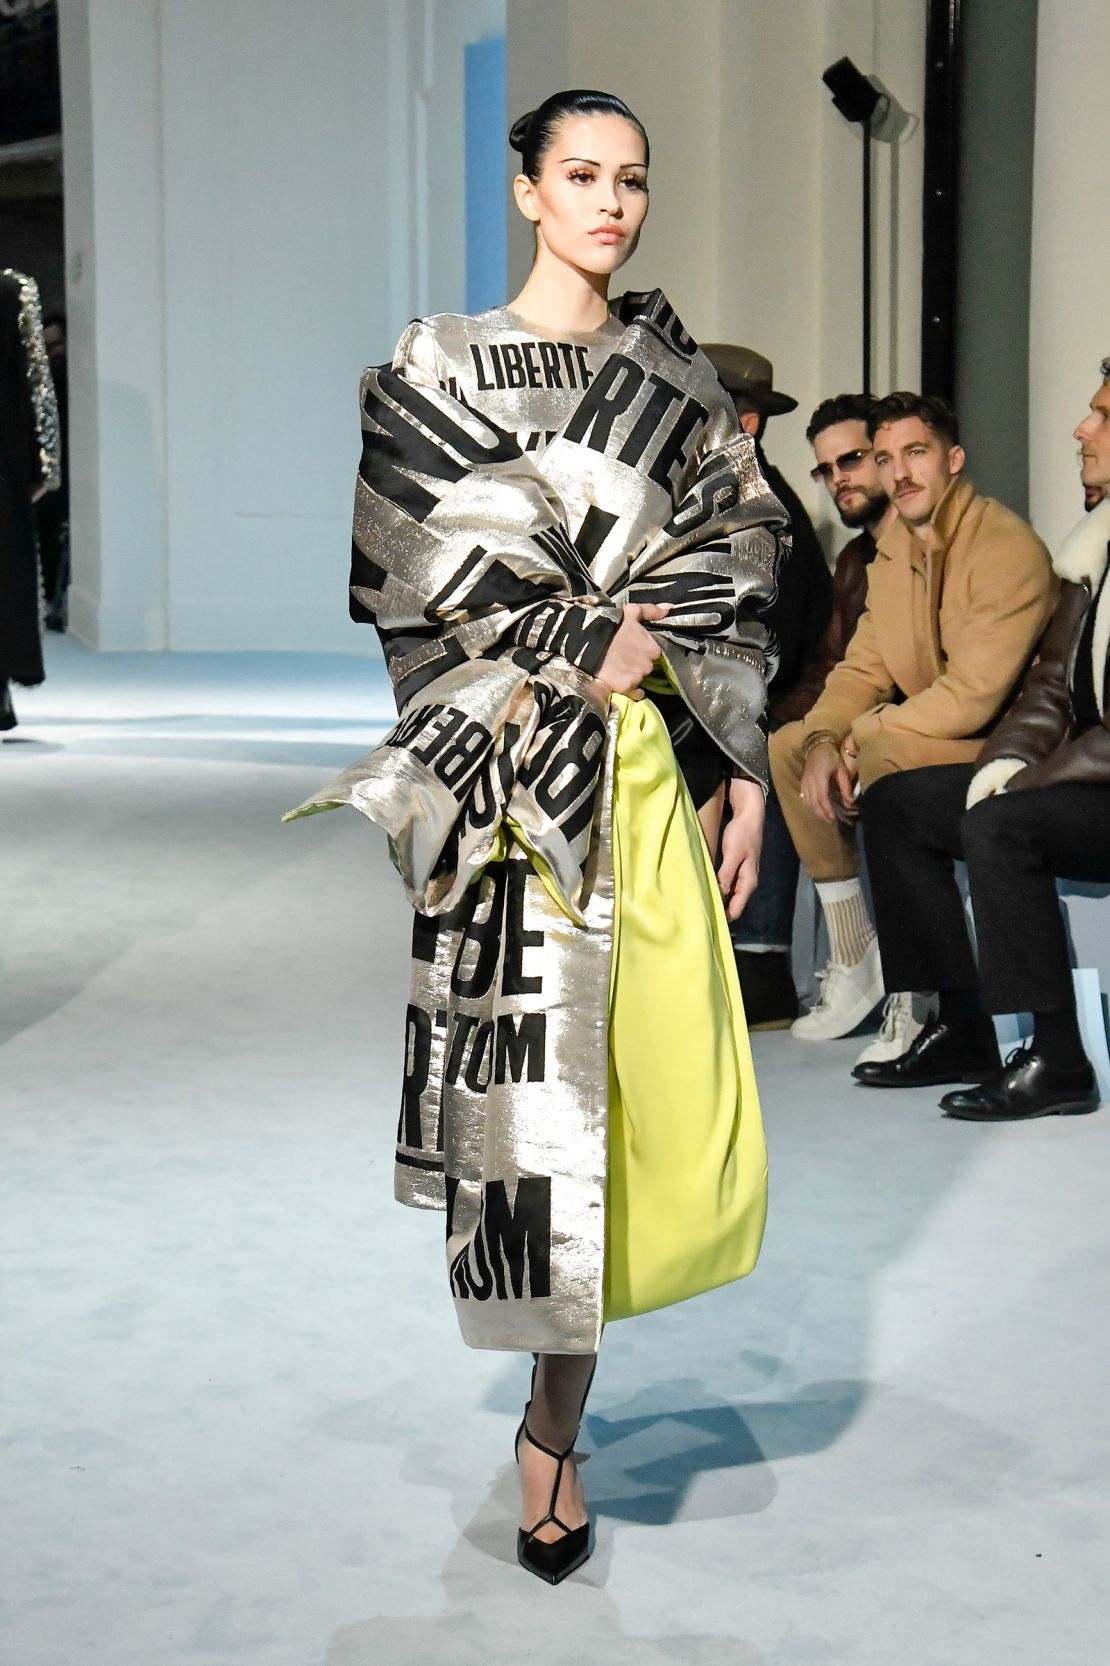 Ackermann was inspired by Gaultier's passion for human rights.